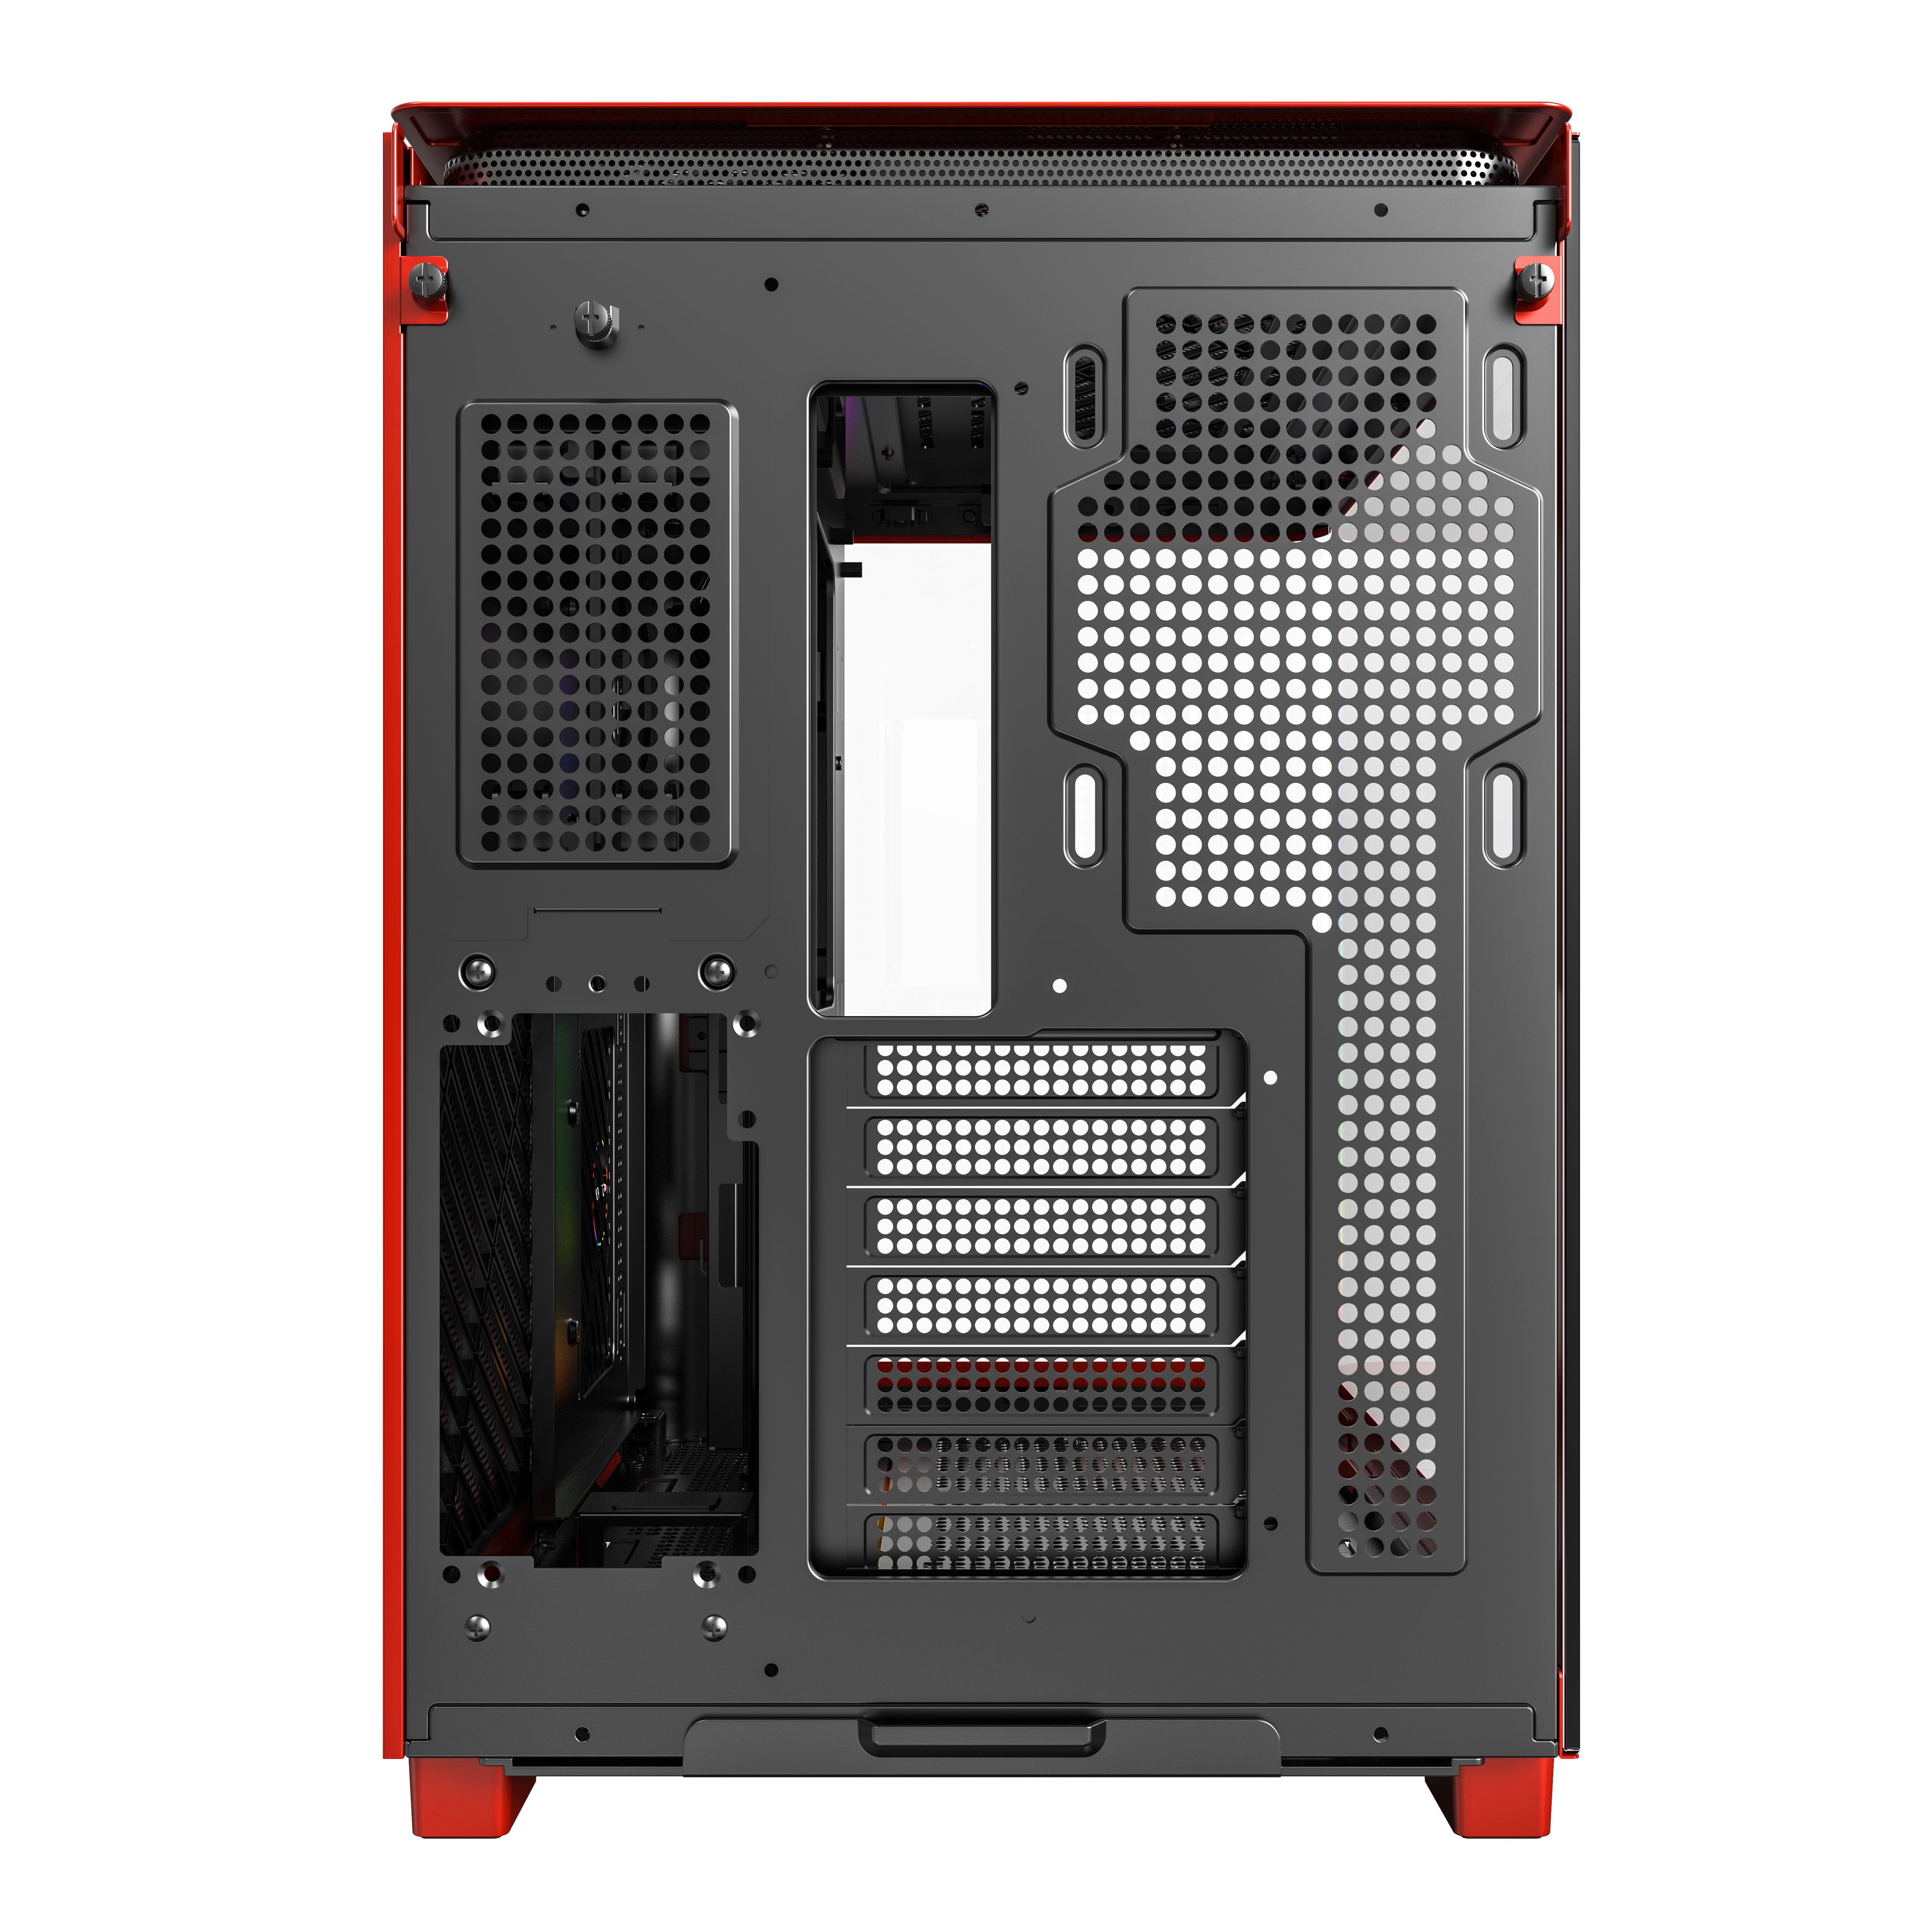 montech - Montech KING 95 Midi-Tower, Tempered Glass, ARGB - Red